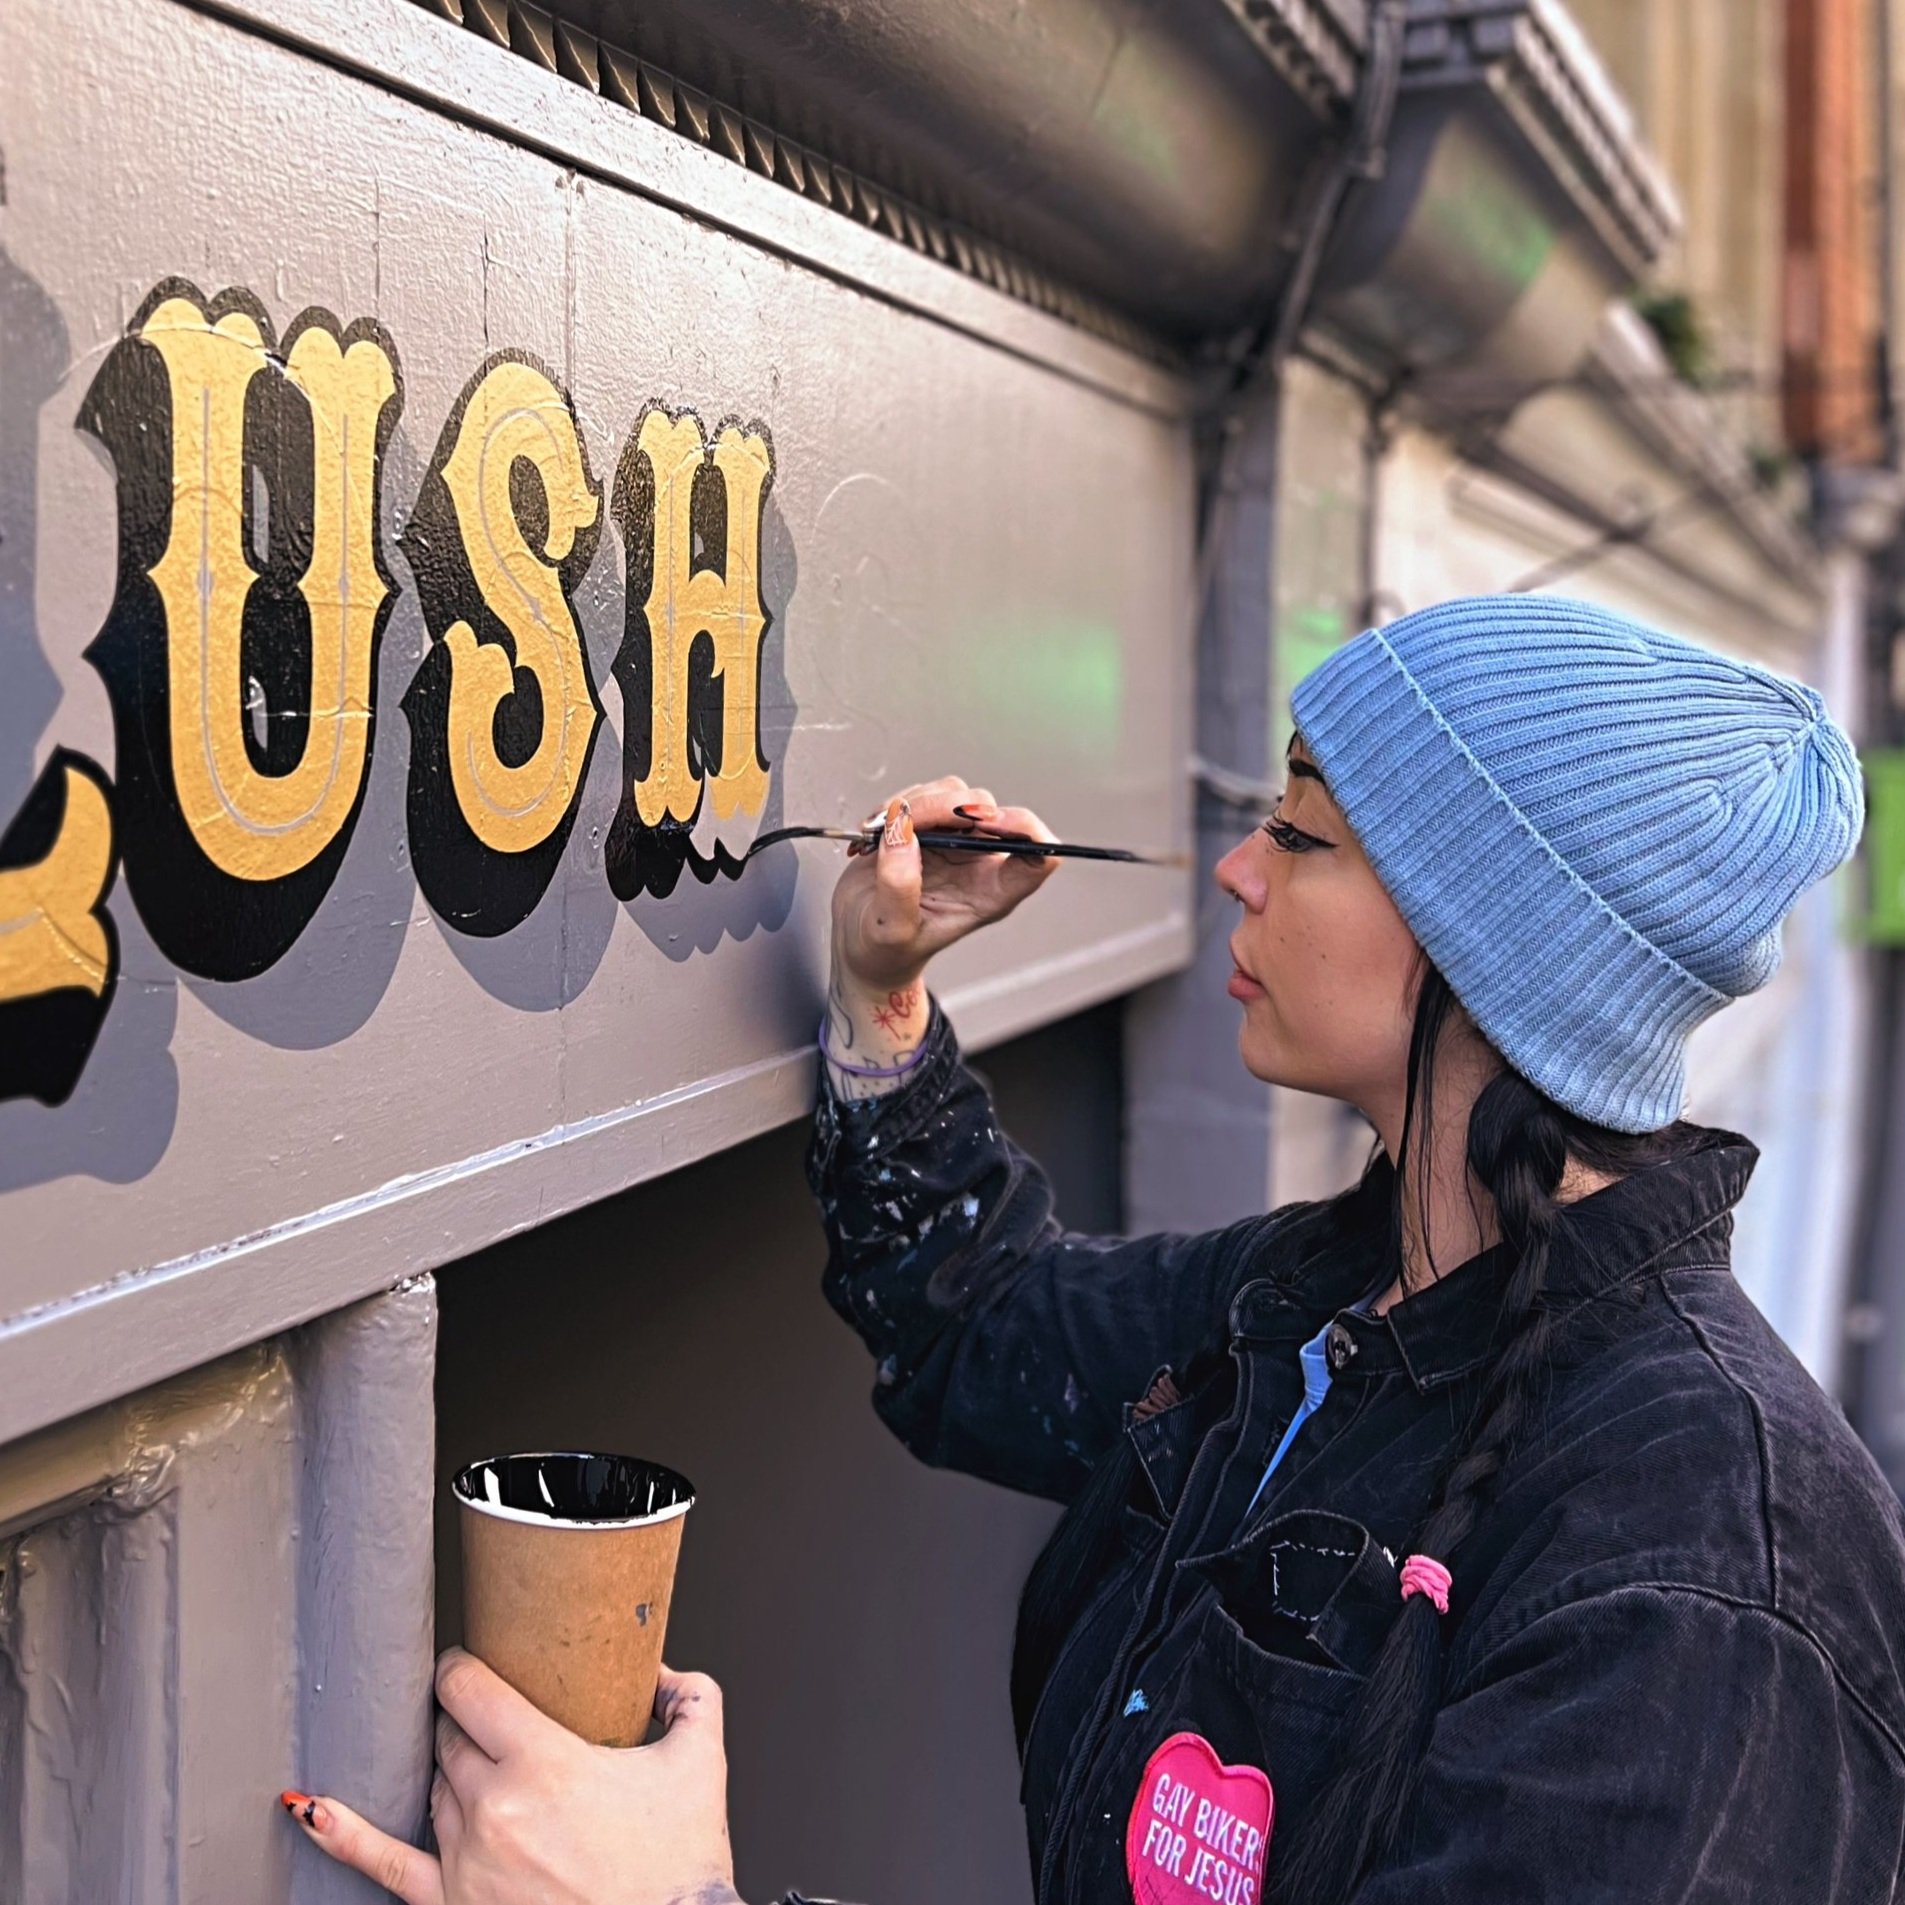 Fascia sign hand painted spelling 'Gert Lush'